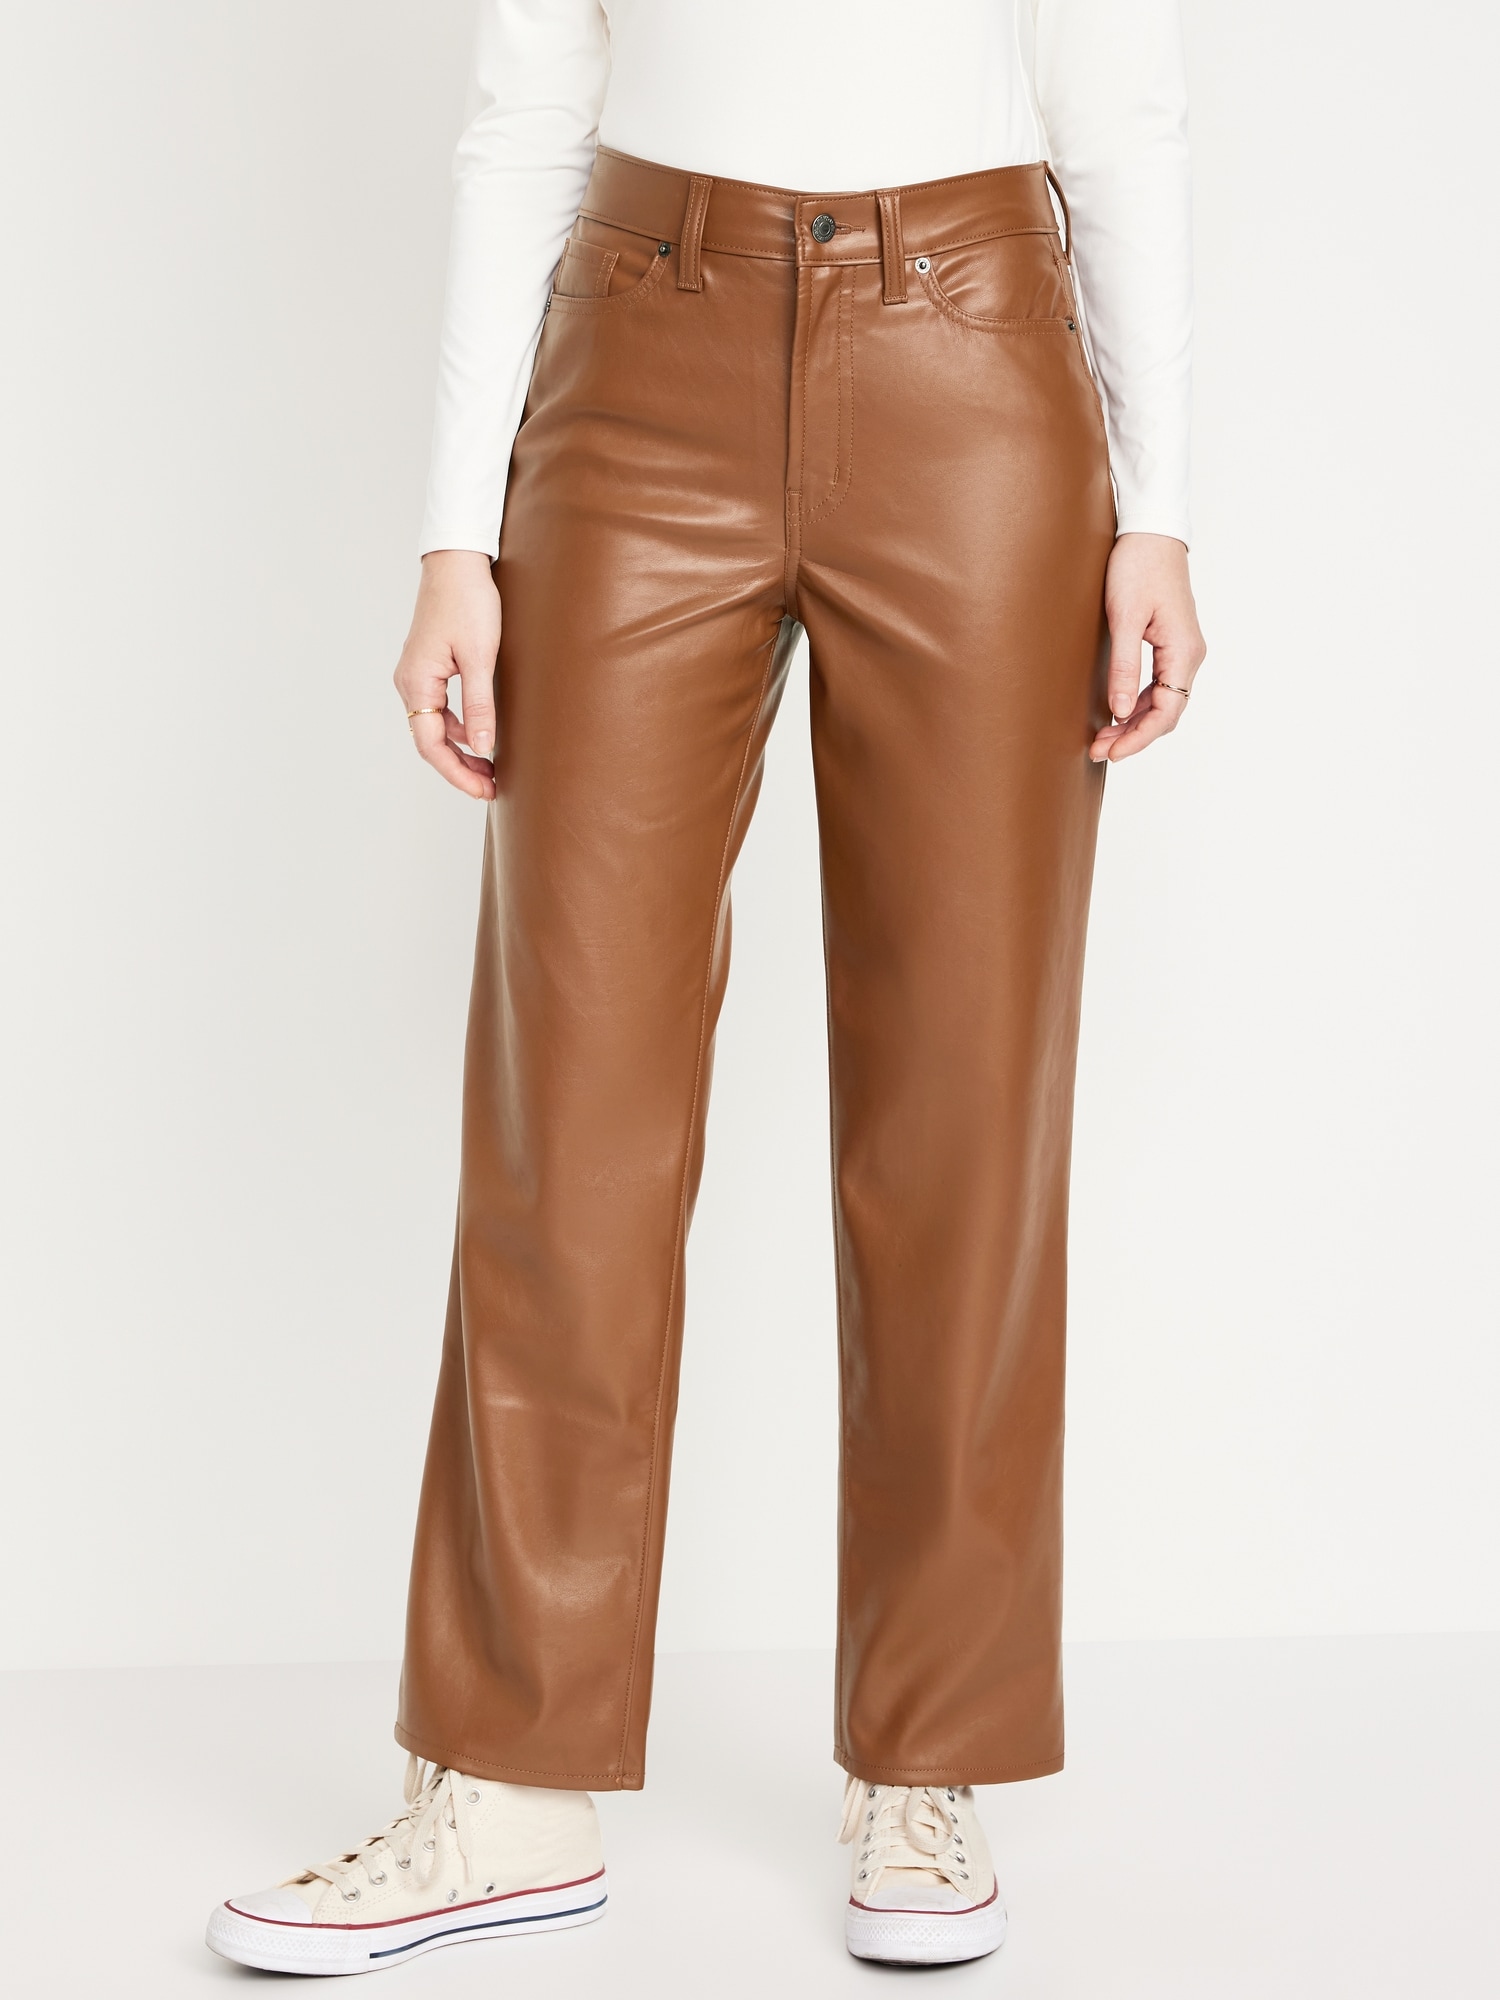 Women's Loose Faux Leather Pants With High Waist  Pants women fashion, Leather  pants, Fashion pants